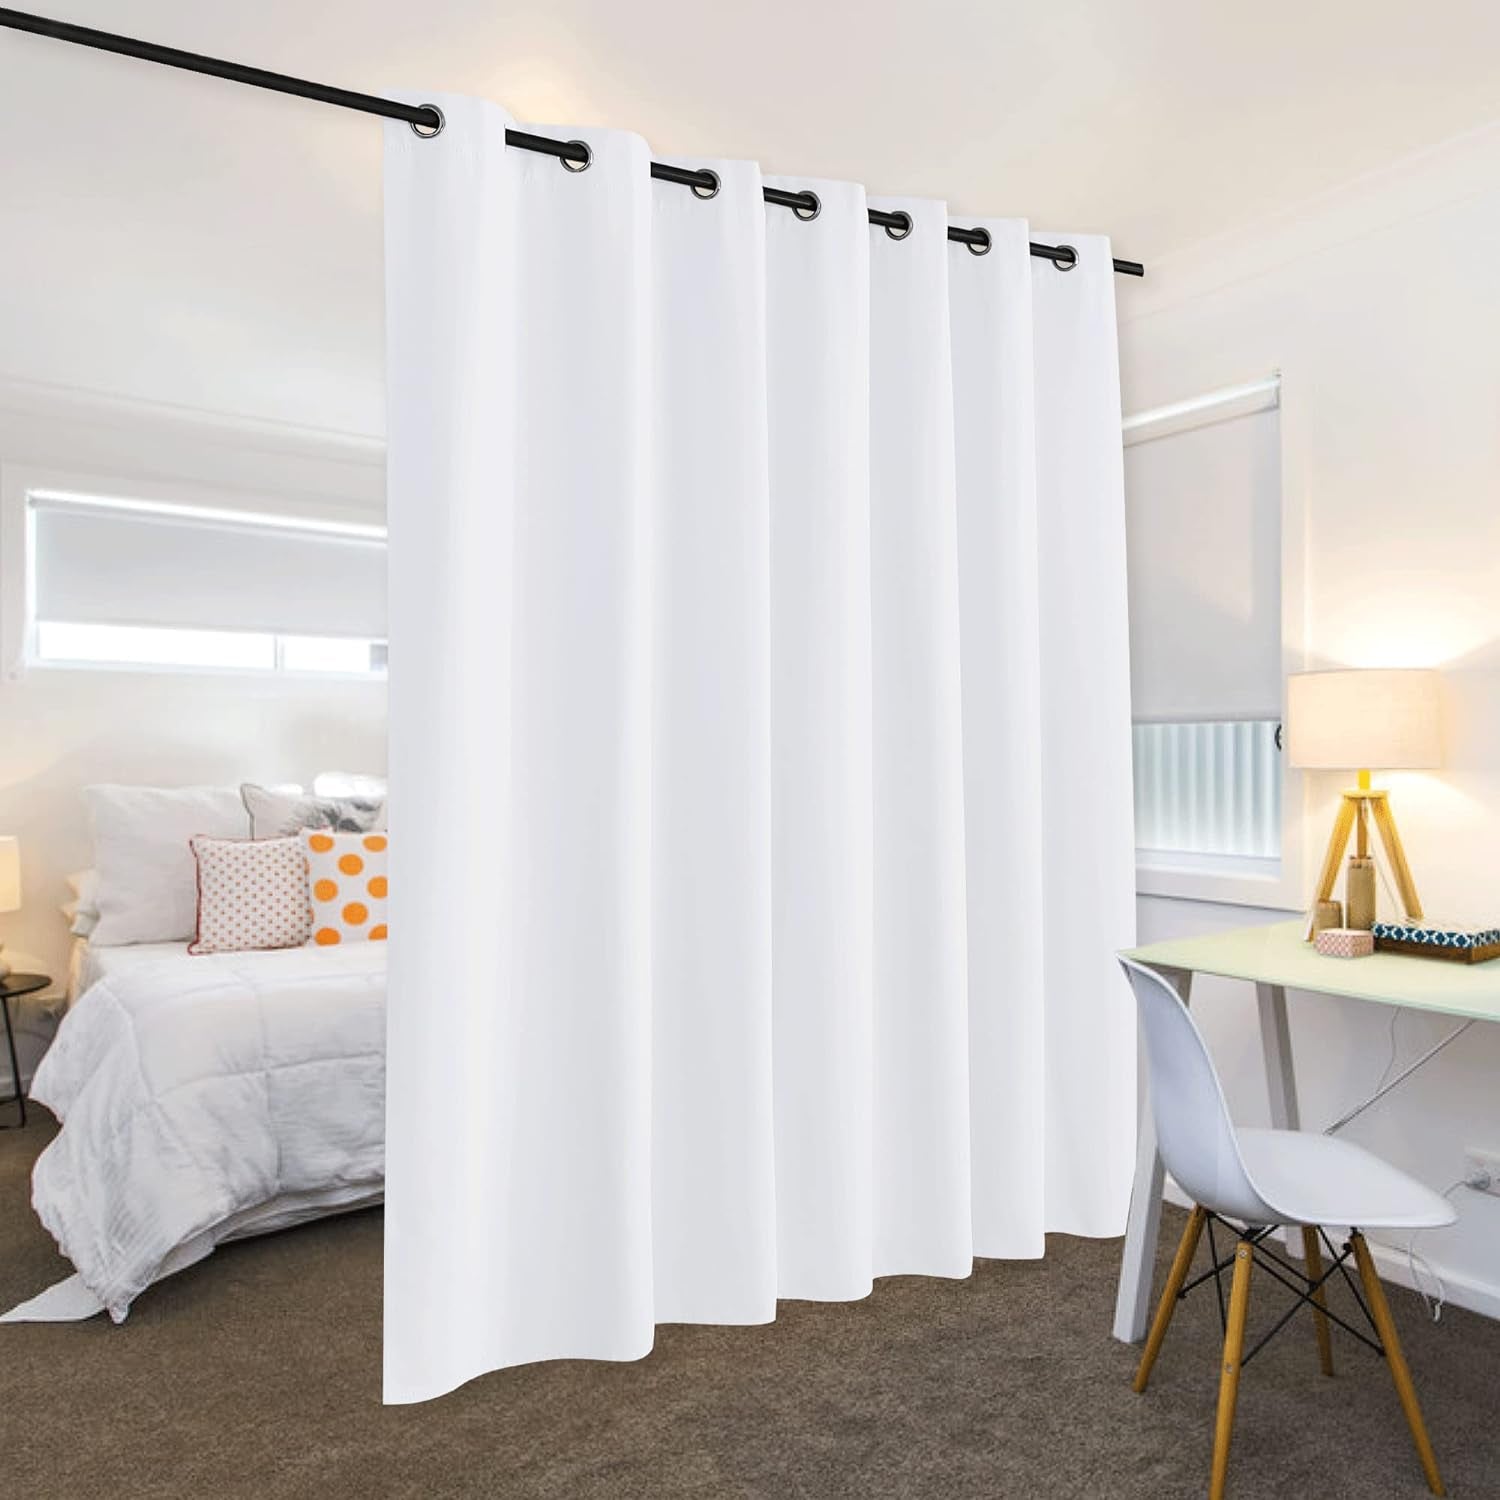 RYB HOME White Curtain Shades - Room Darkening Curtains for Bedroom, 50% Light Block Thermal Insulated Panel for Living Room Sliding Glass Door, W 100 X L 120 Inches, Pure White  RYB HOME   